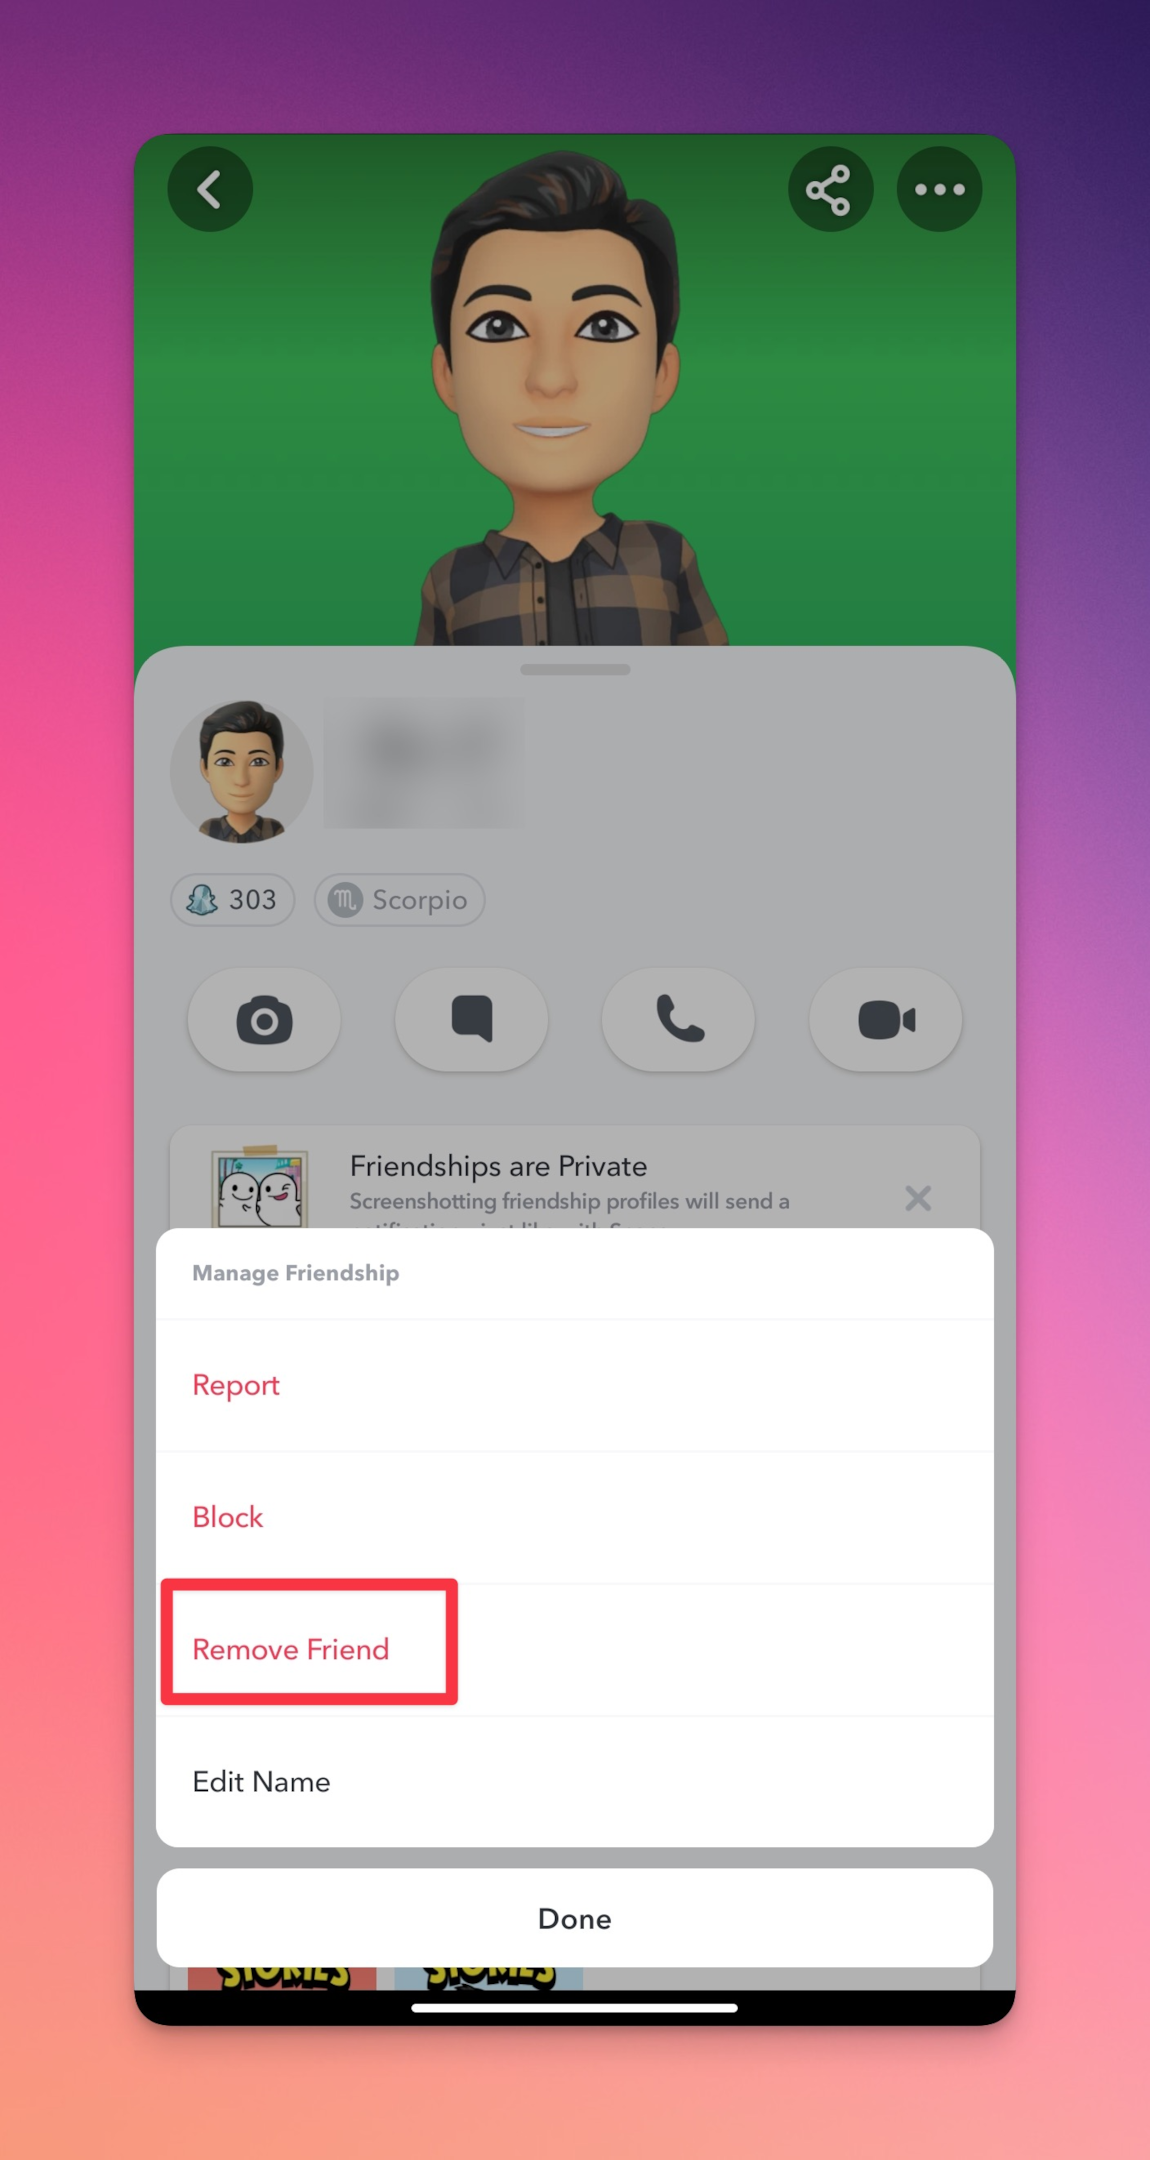 Remote.tools highlighting the Remove friend option to to remove them as friend on Snapchat